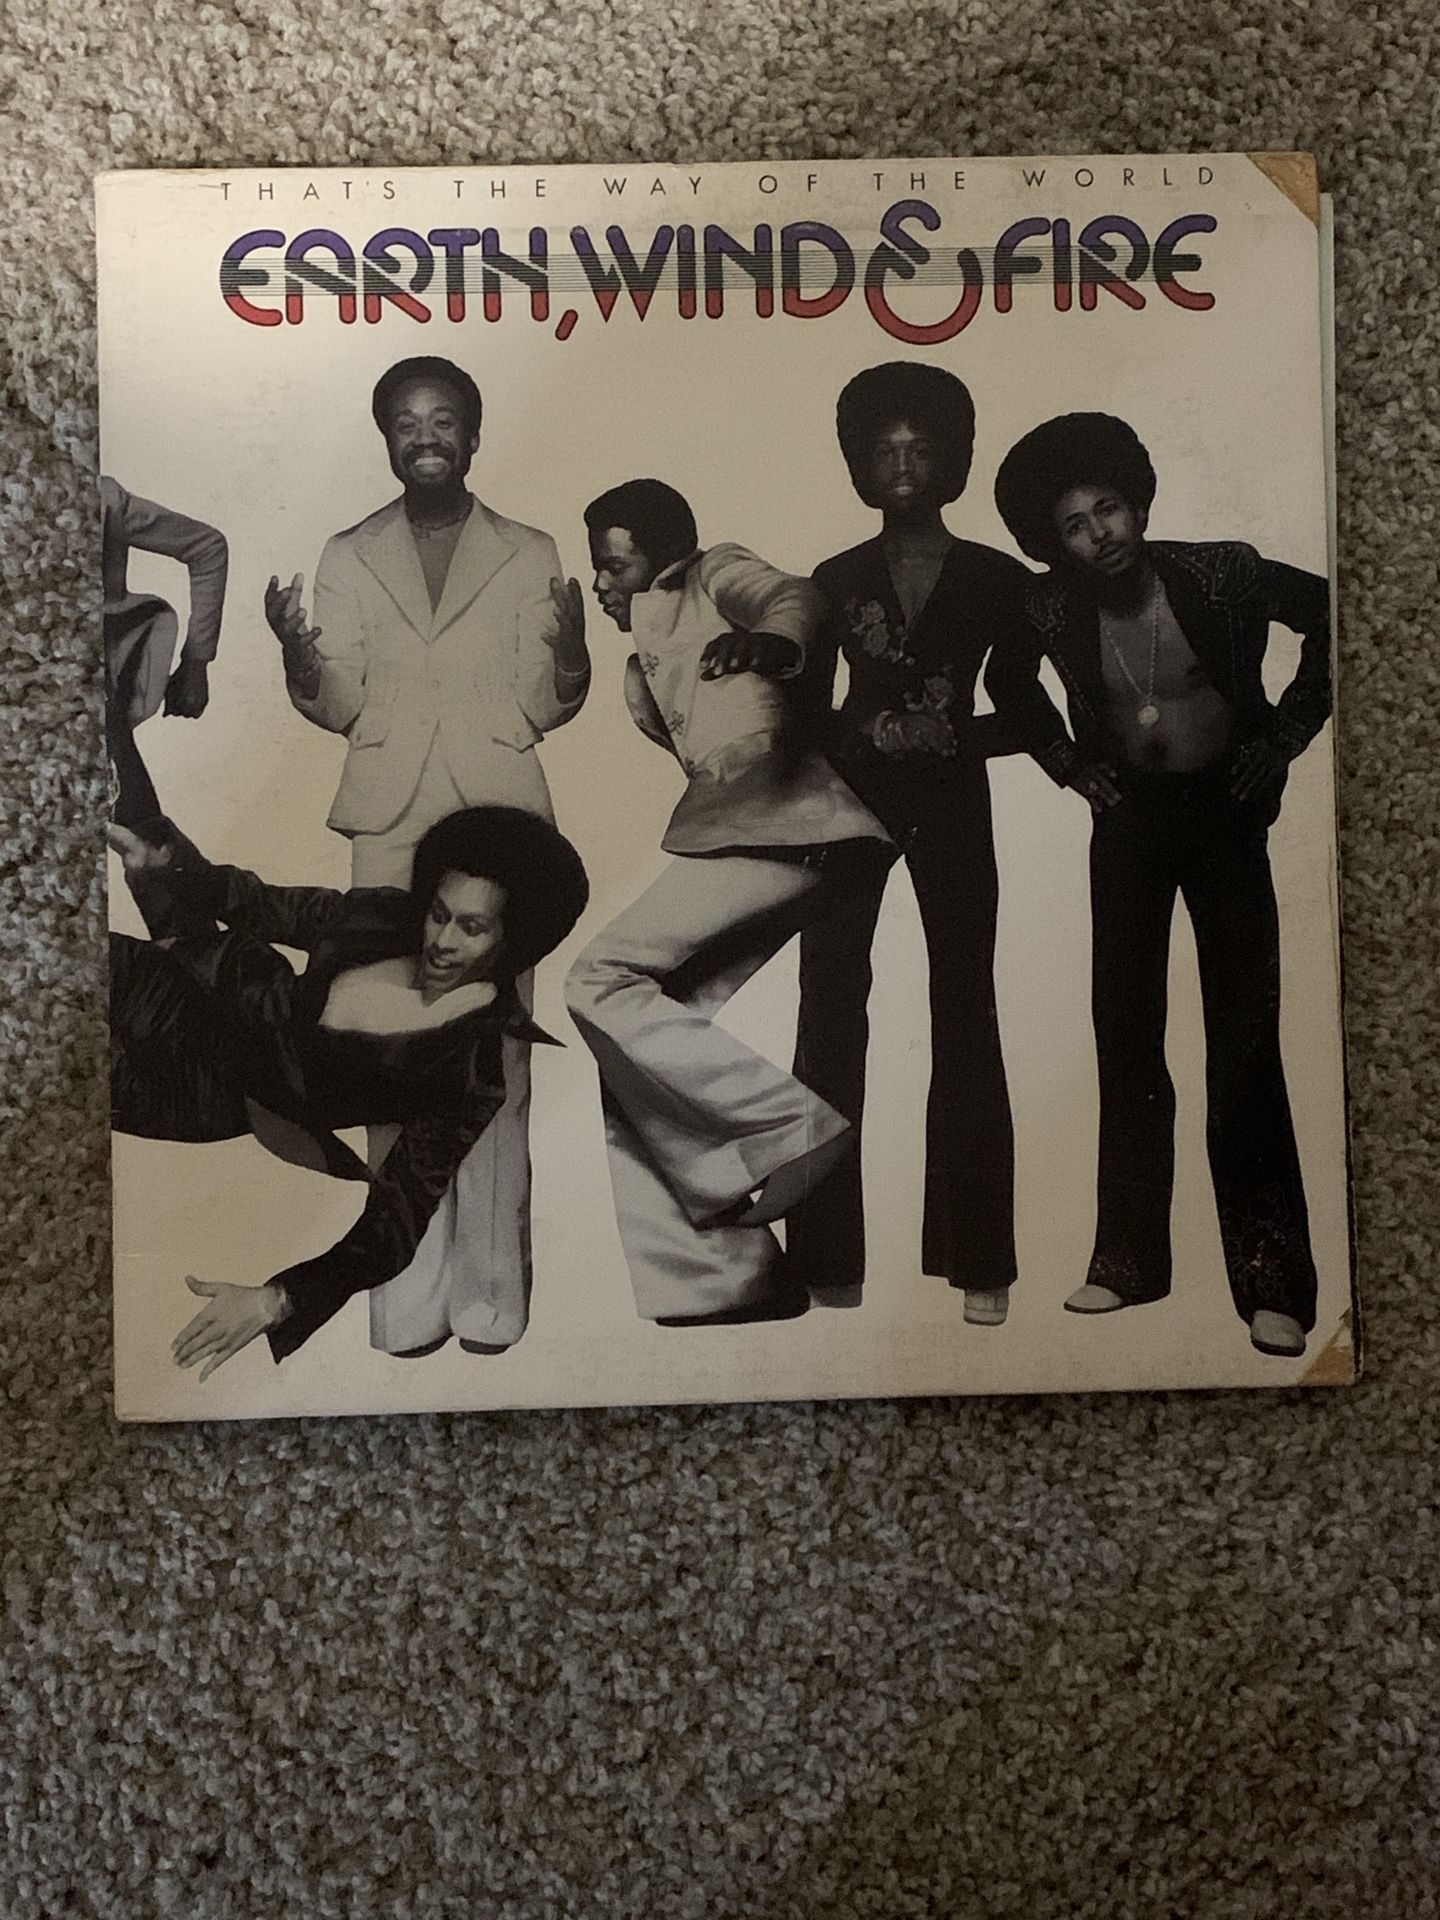 Earth, Wind And Fire - That's The Way Of The World Vinyl LP - 1975 - PC 33280